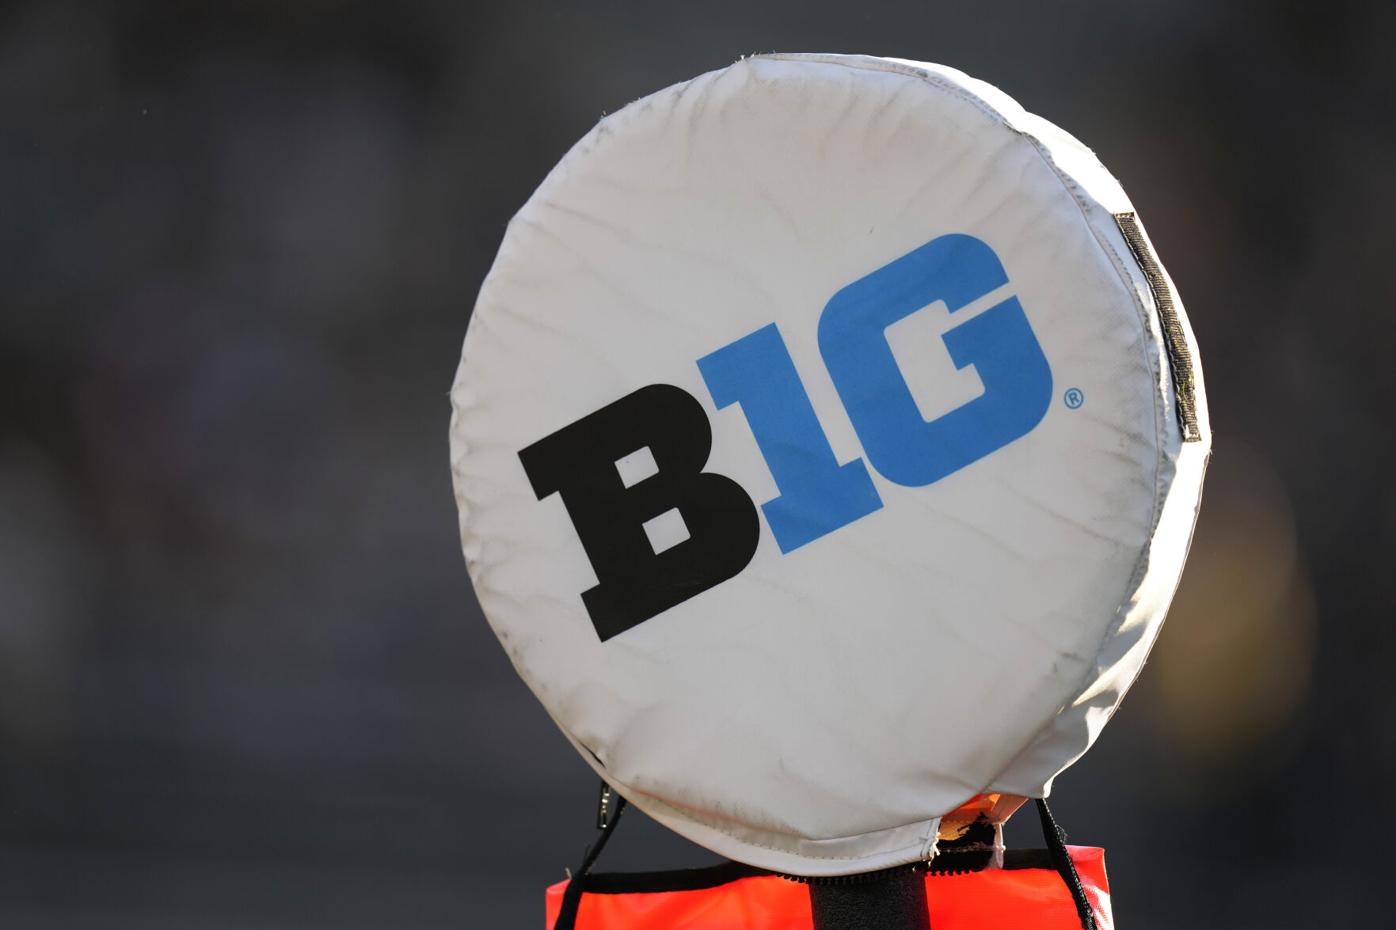 Big Ten football is ready for maximum exposure with games on NBC